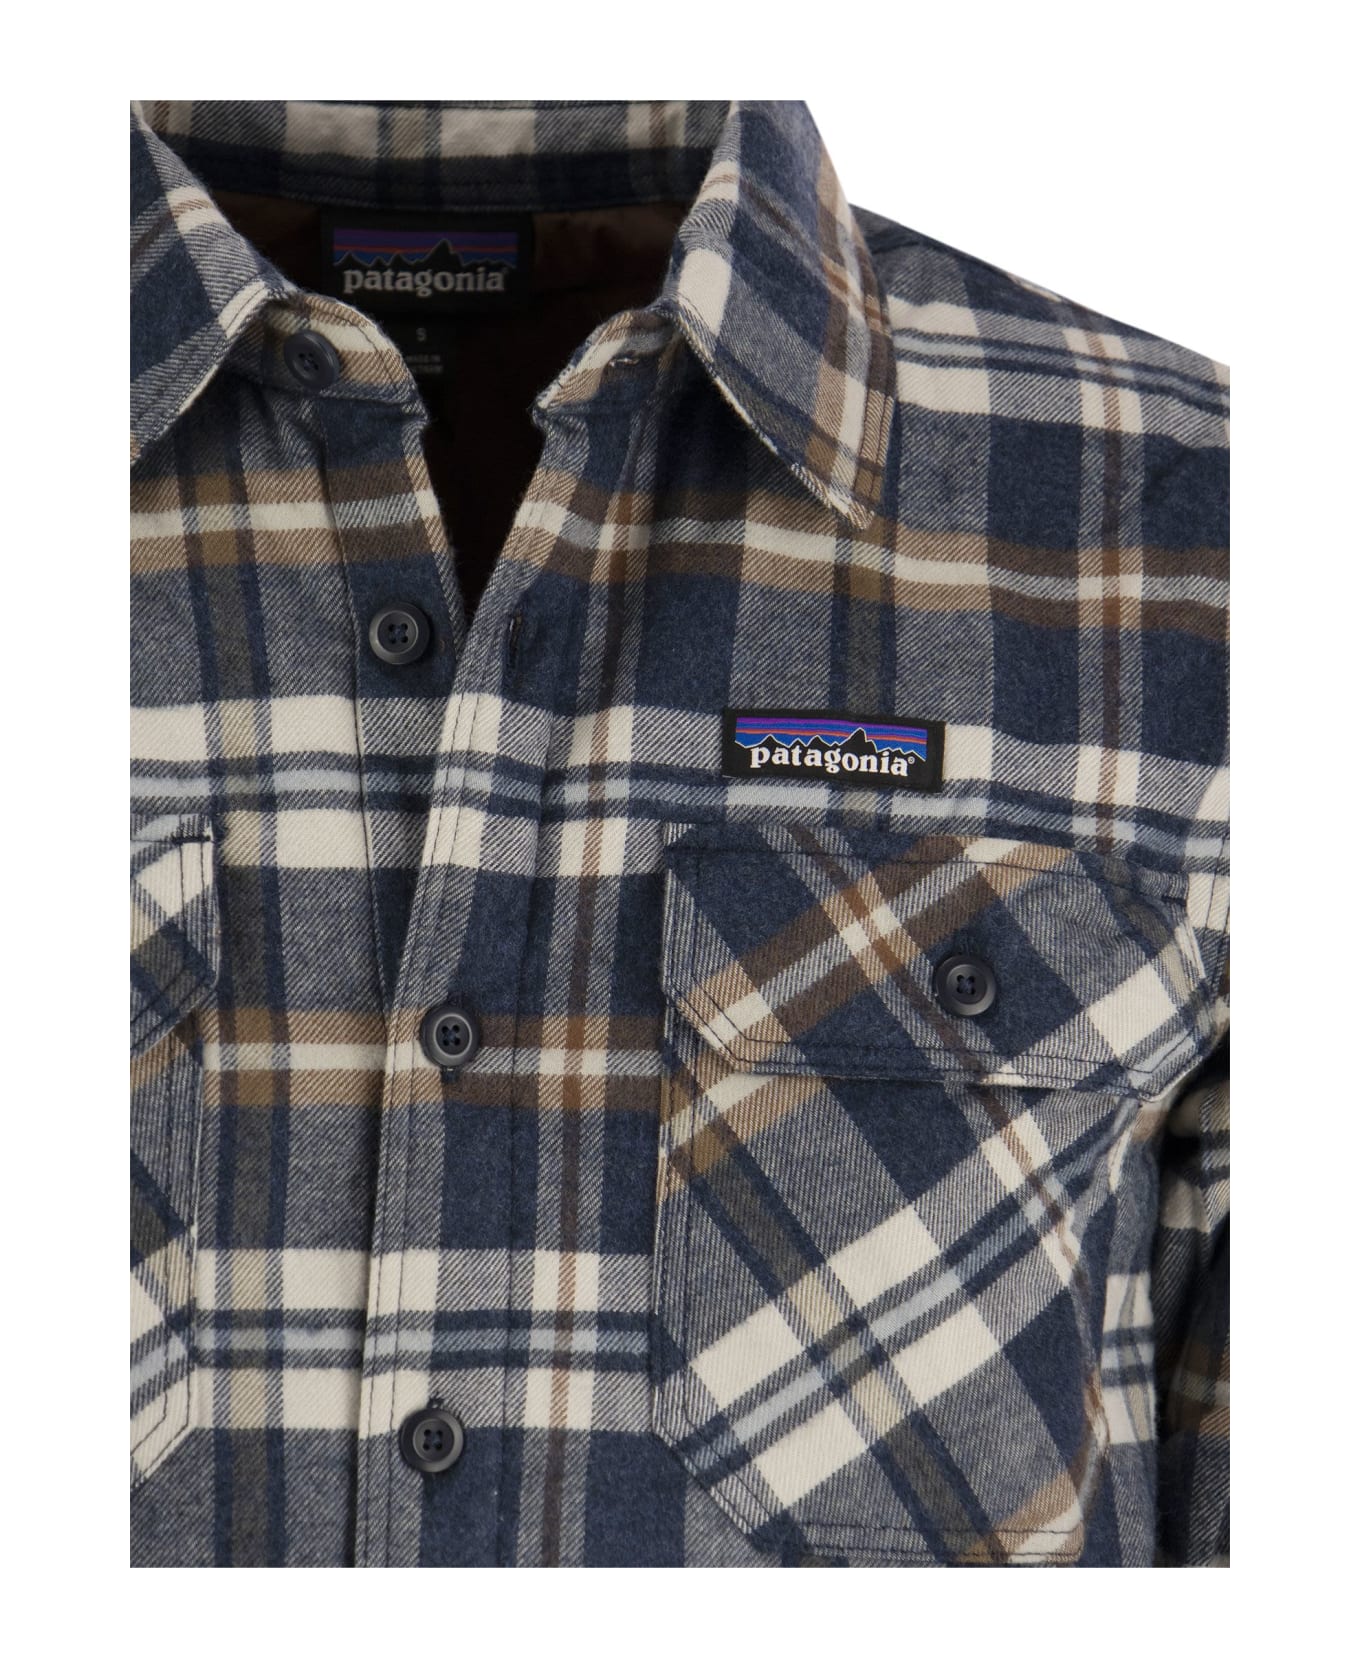 Patagonia Medium Weight Organic Cotton Insulated Flannel Shirt Fjord - Navy